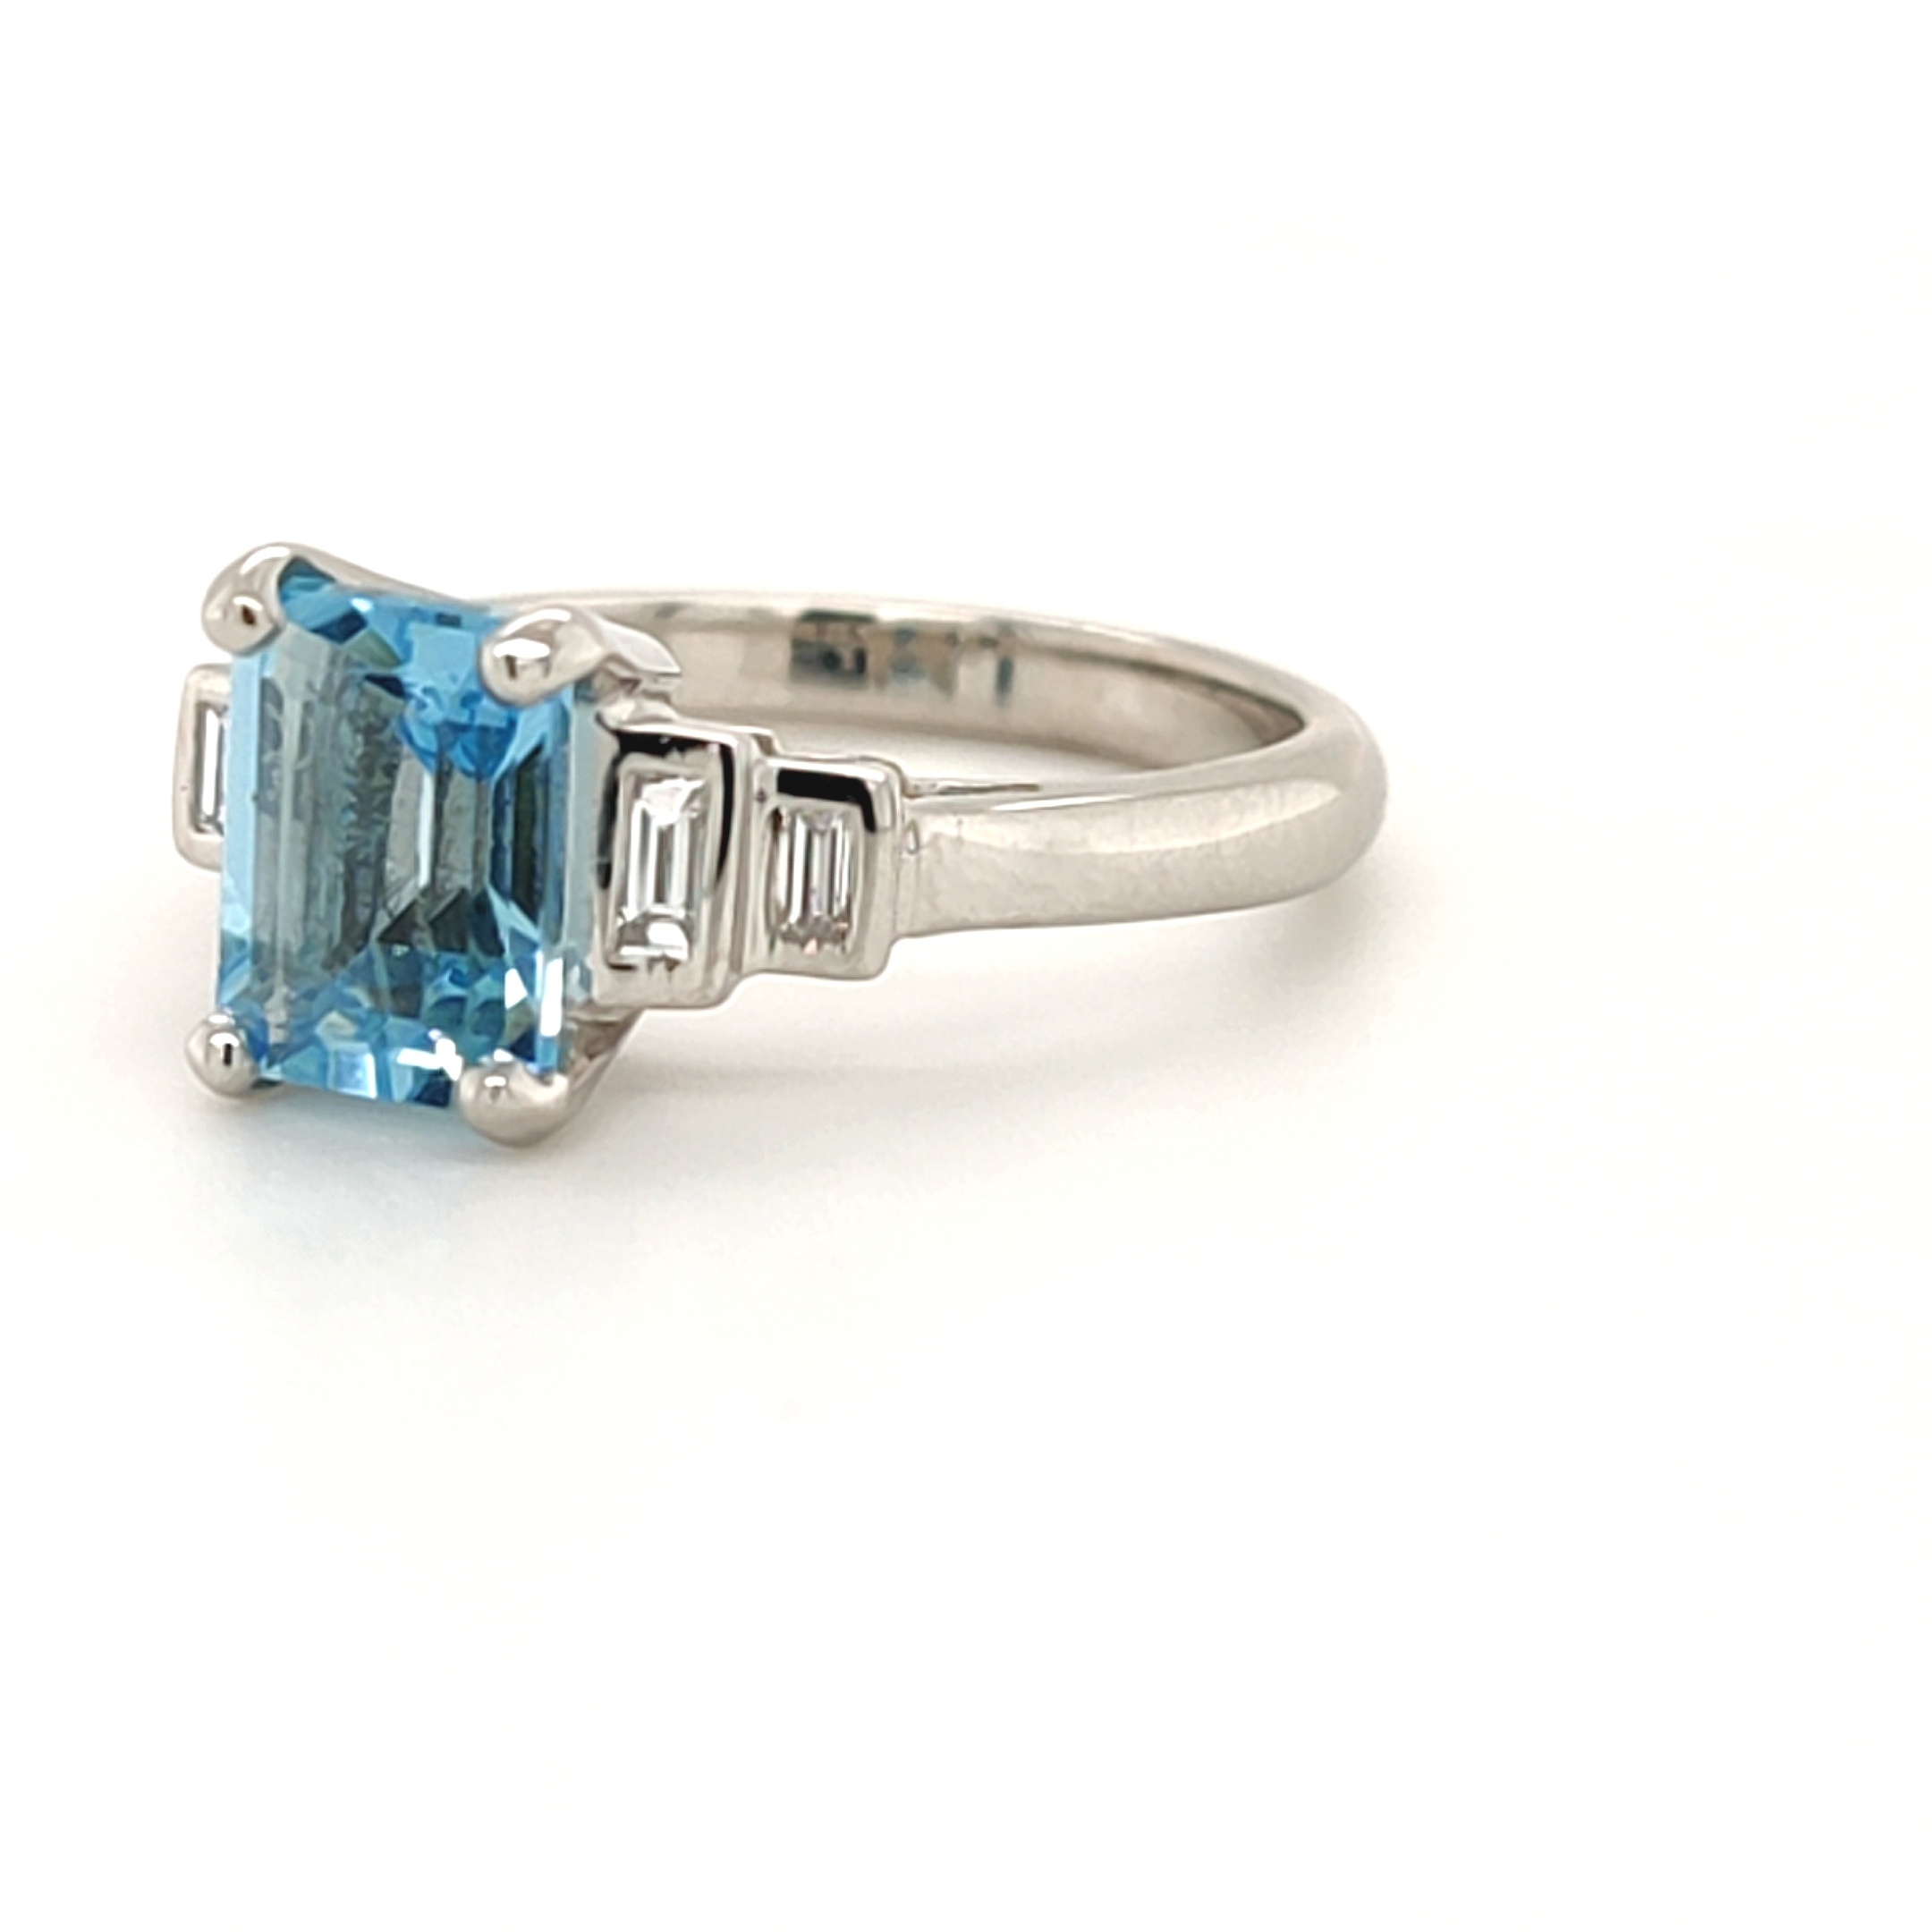 18ct White Gold 1.05ct (Assessed) Aquamarine and Baguette Cut Diamond Ring